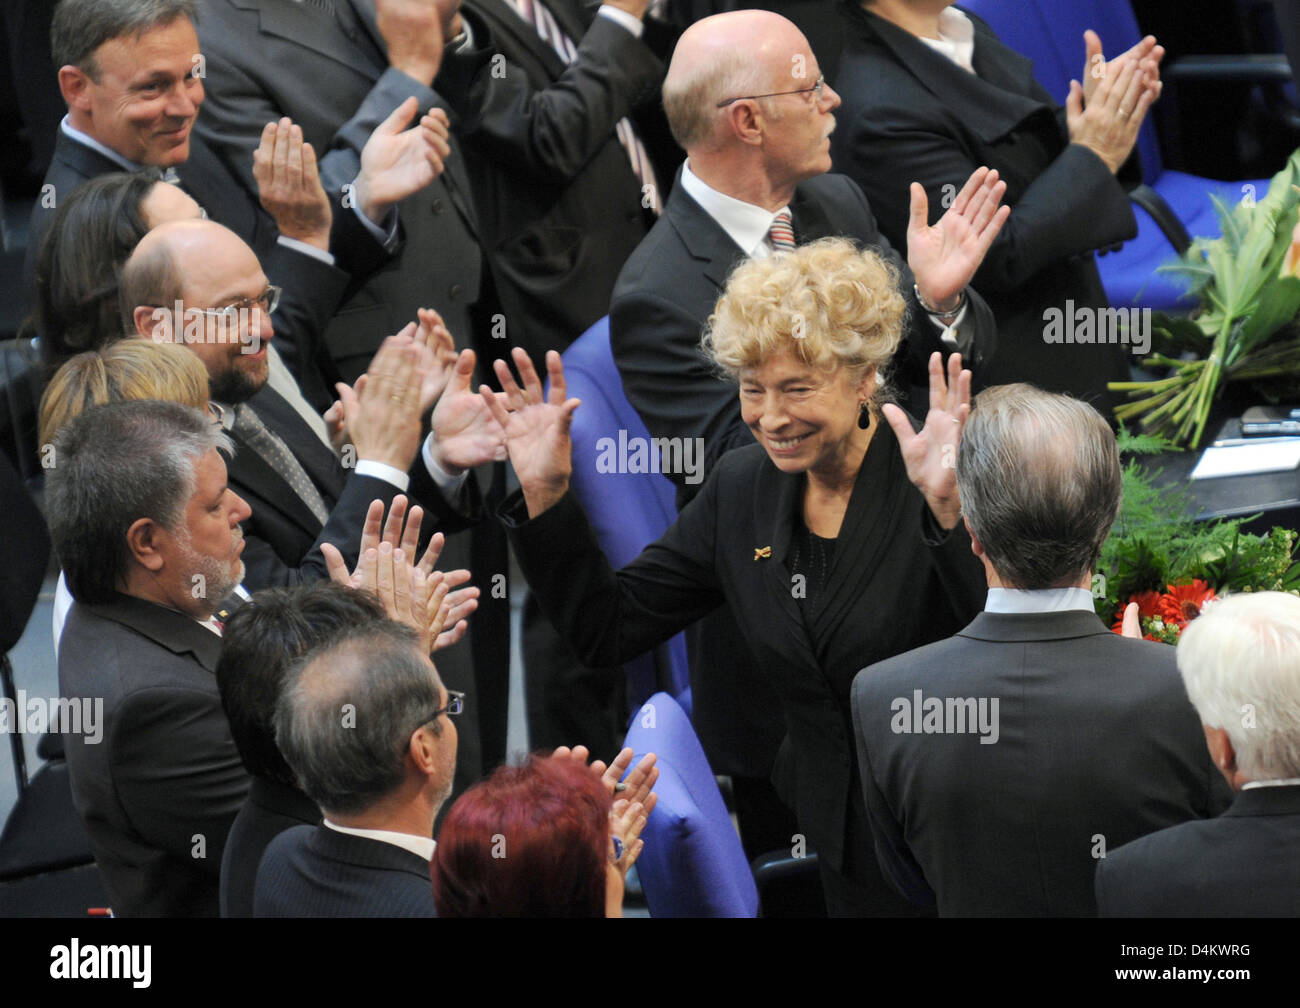 Candidate of the SPD Gesine Schwan (C) waves to SPD members after the reelection of Federal German President Koehler at the 13th Federal Convention in the plenar hall of the Reichstag building in Berlin, Germany, 23 May 2009. Koehler won the election with 613 votes, the minimum number of necessary votes. Photo: PEER GRIMM Stock Photo